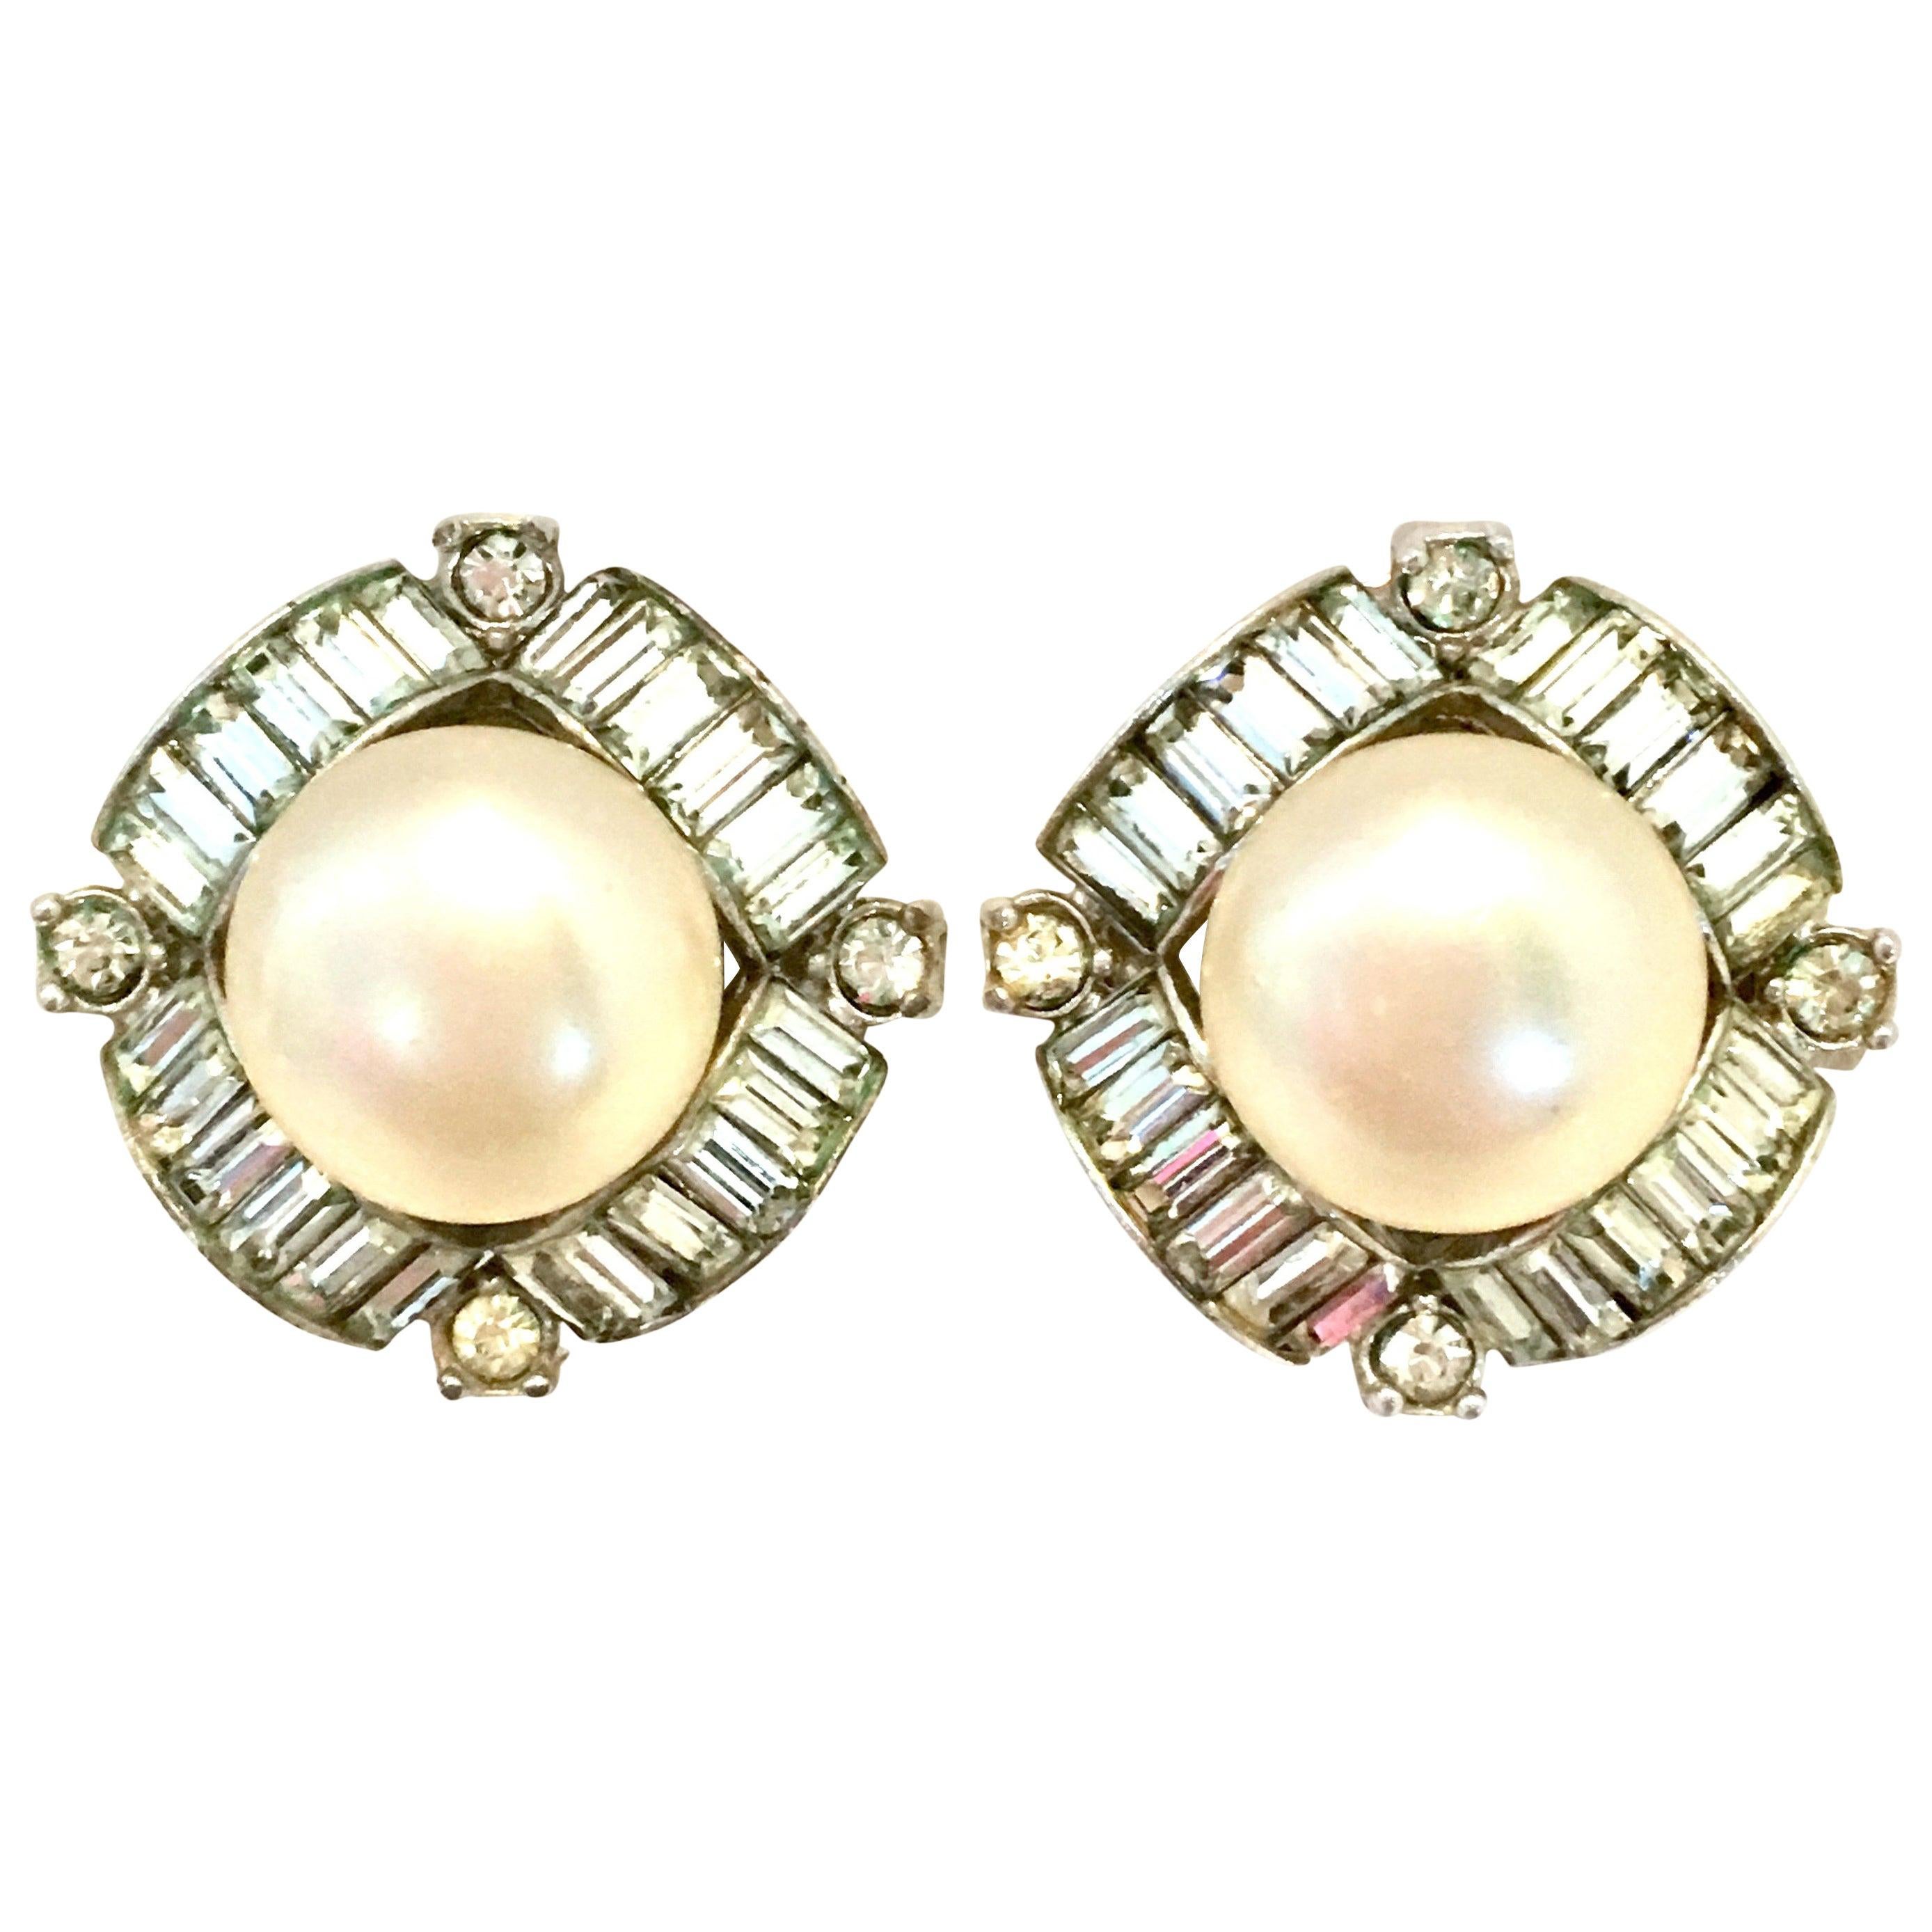 Md-20th Century Silver Plate Faux Pearl & Austrian Crystal Earrings By, Marvella. These dramatic, classic and finely crafted clip style silver plated earrings feature a central and large round faux pearl, surrounded by paste set brilliant baguette